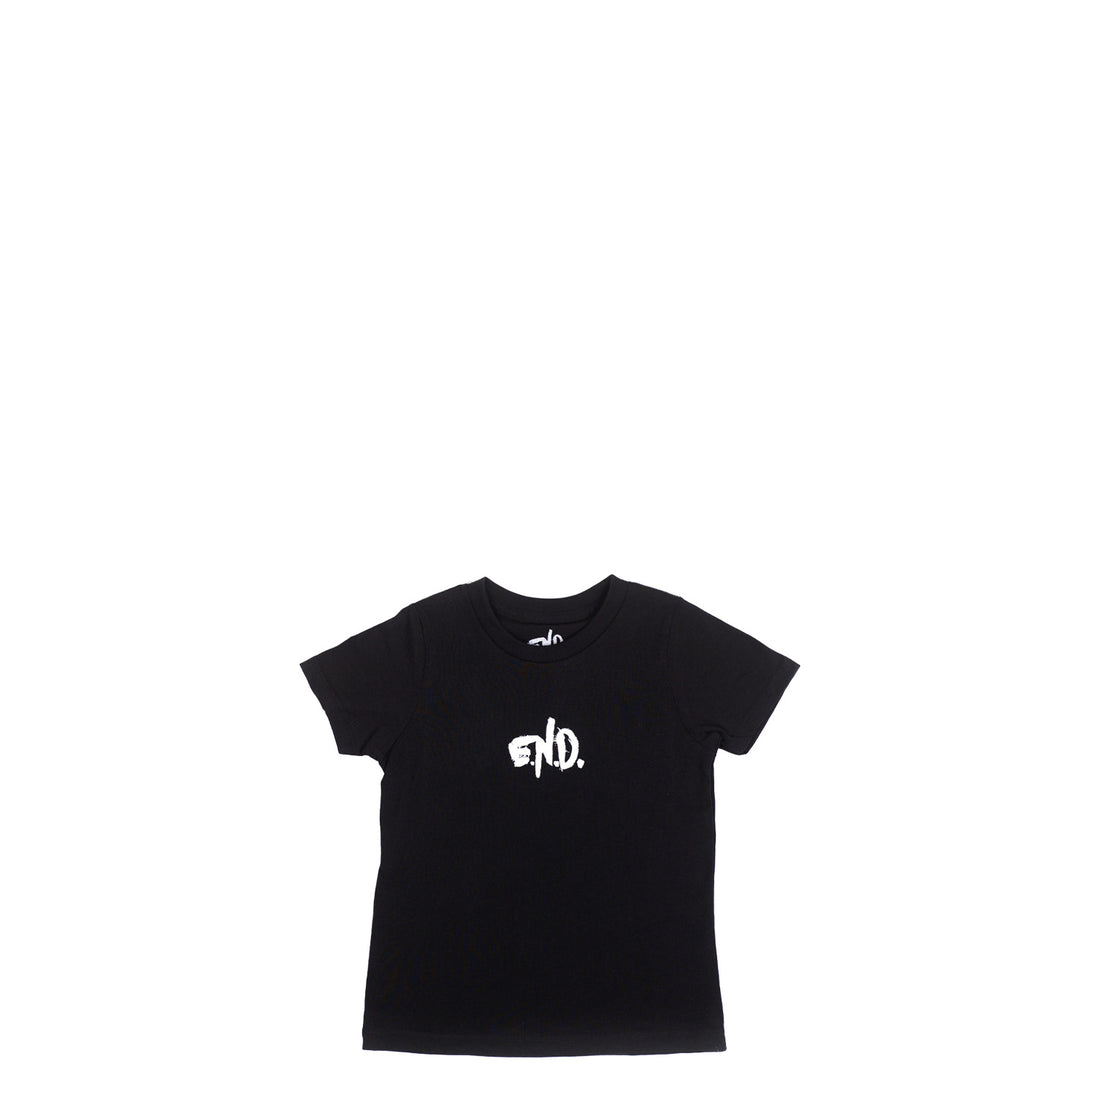 Emo’s Not Dead, Band Merch, END Toddler Tee